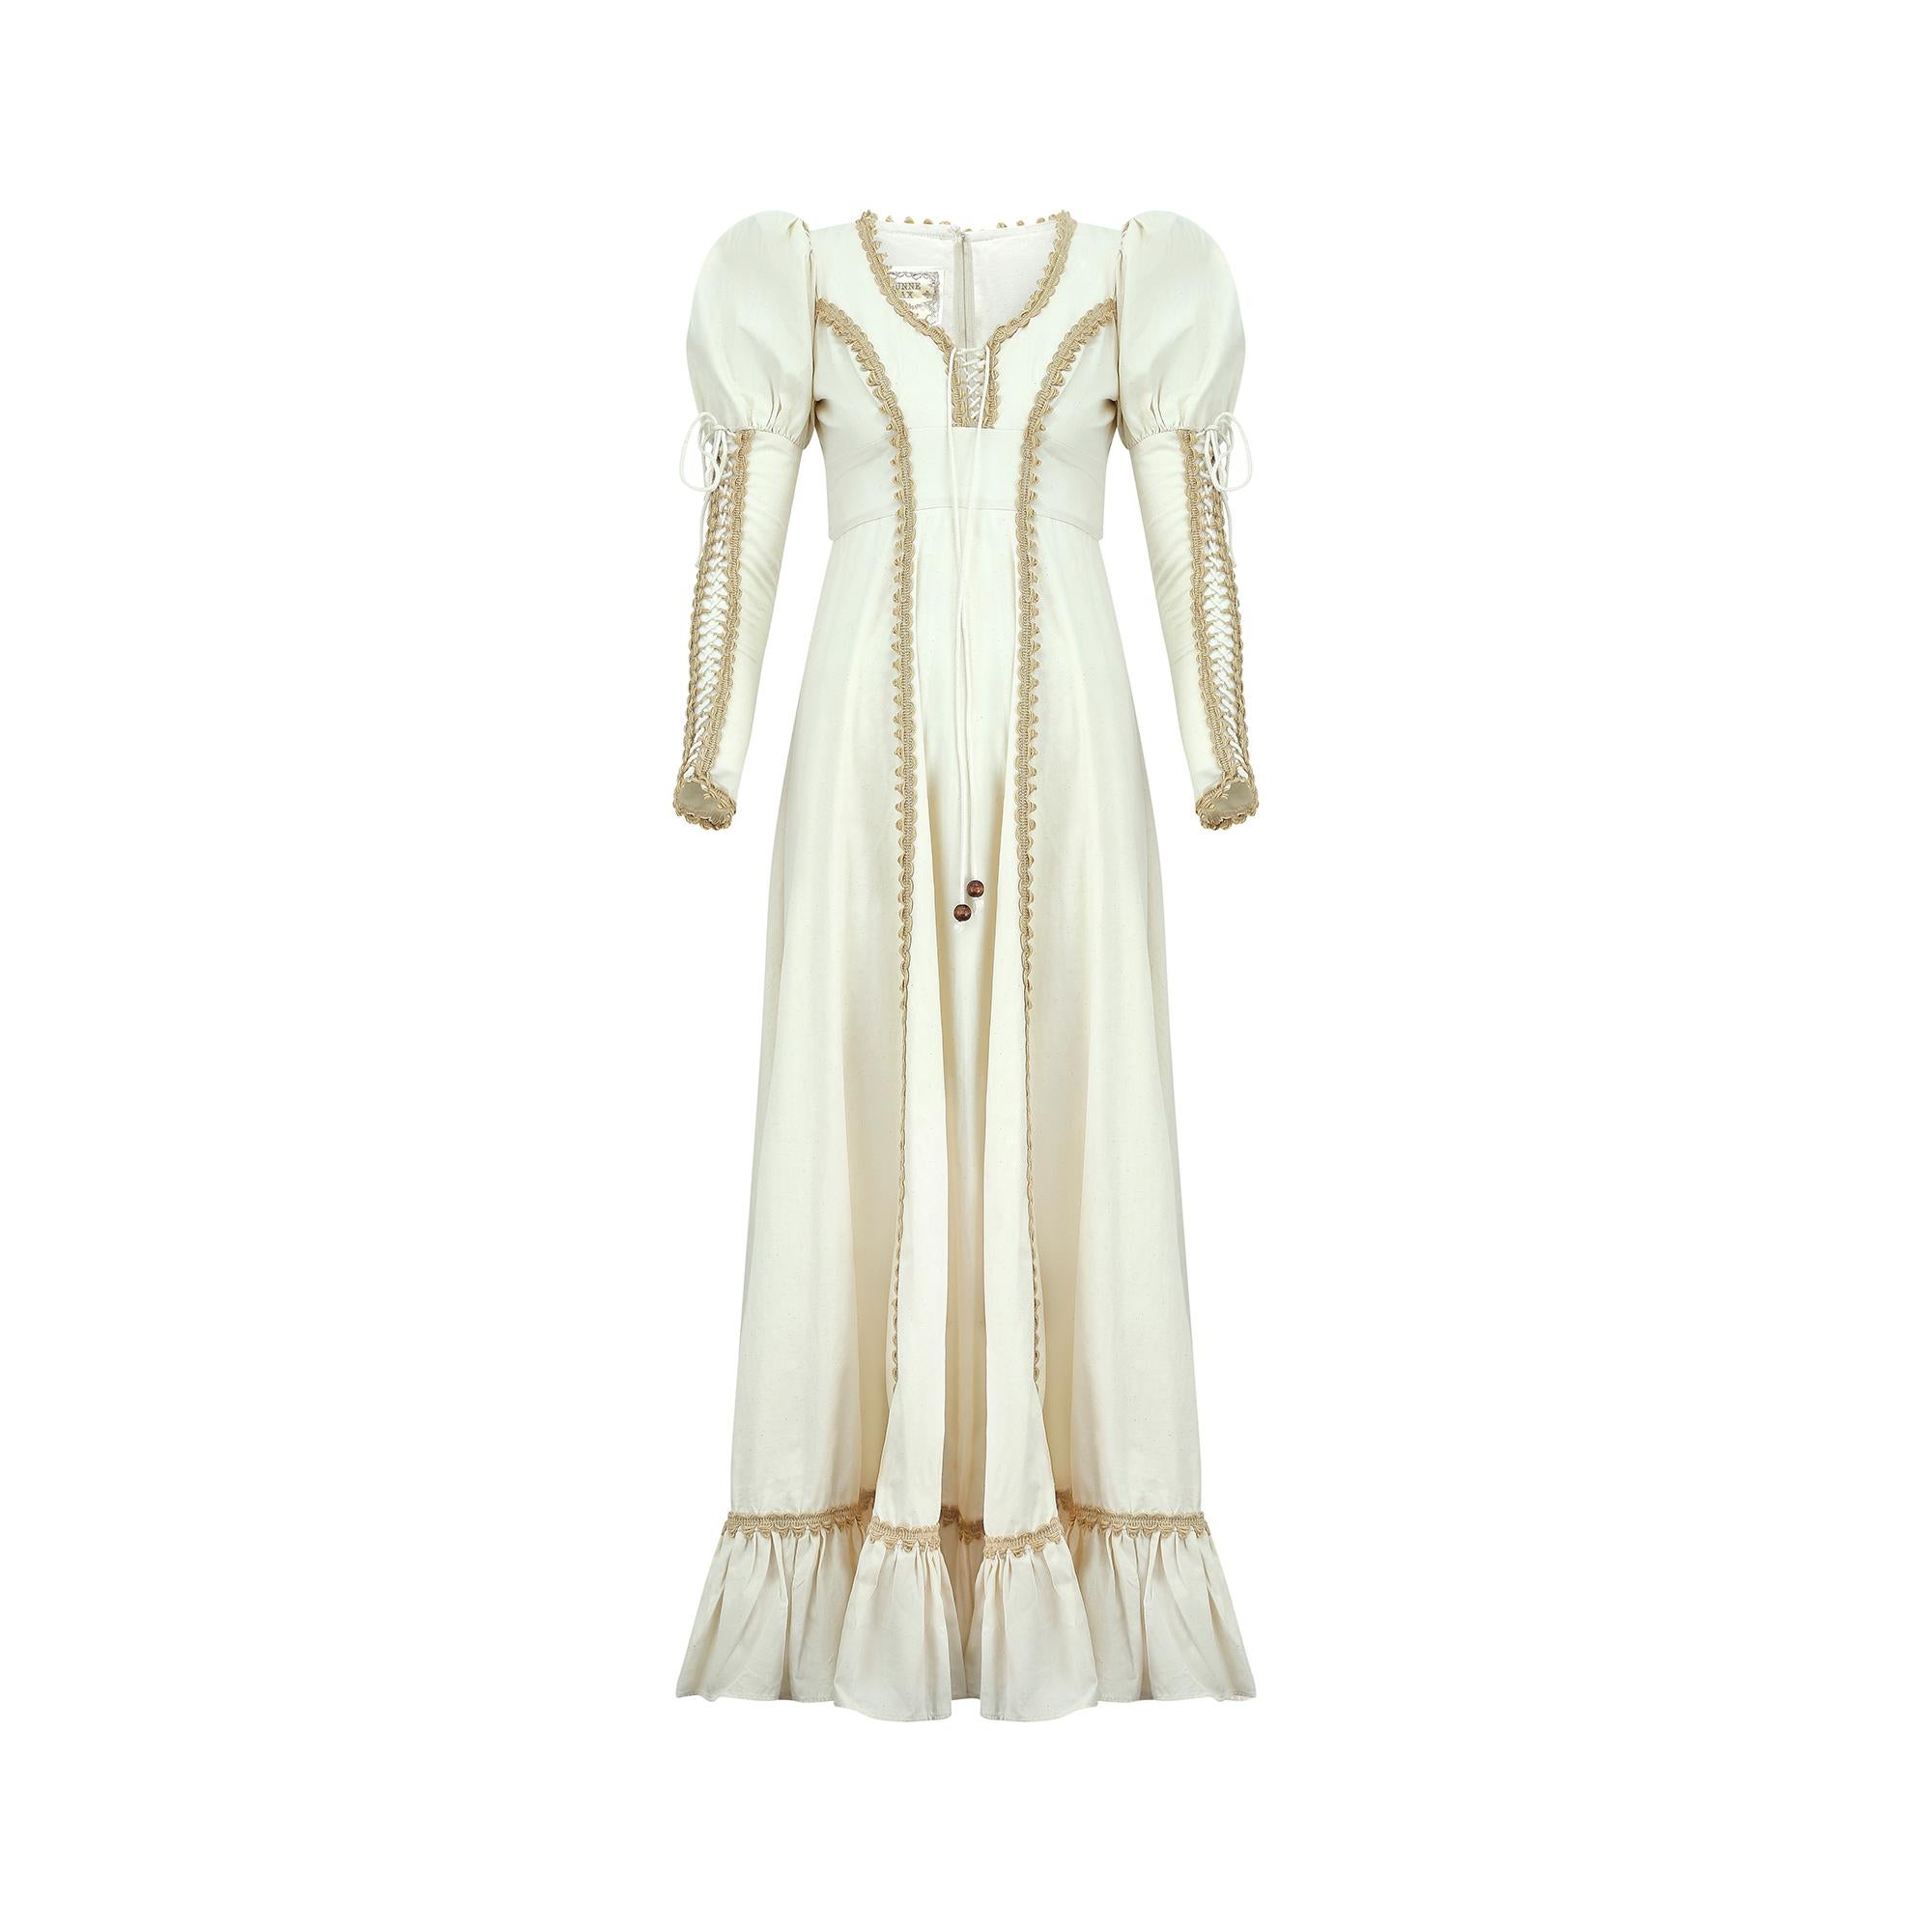 This Gunne Sax by Jessica McClintock dress perfectly embodies the nostalgic hippie trends of the early to mid 1970s.  Full length and elaborate, this is one of the more expensive medieval inspired gowns composed of a non-stretch, unbleached poplin